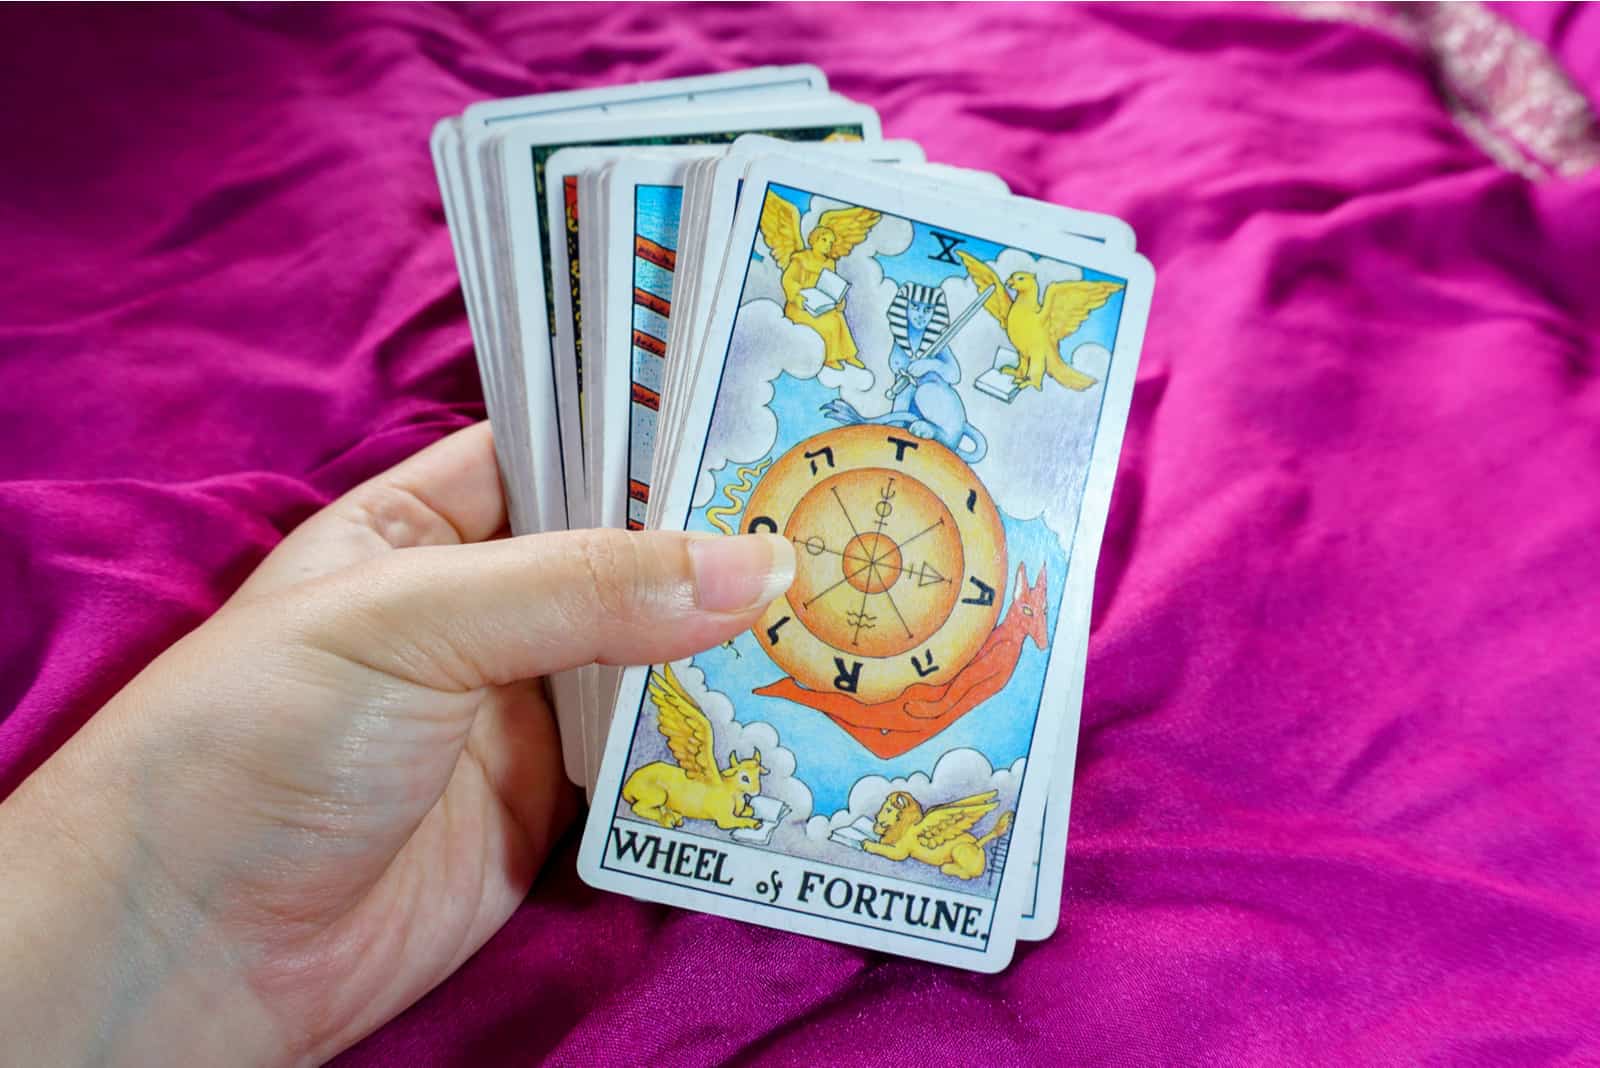 person holding tarot card deck with wheel of fortune card on top